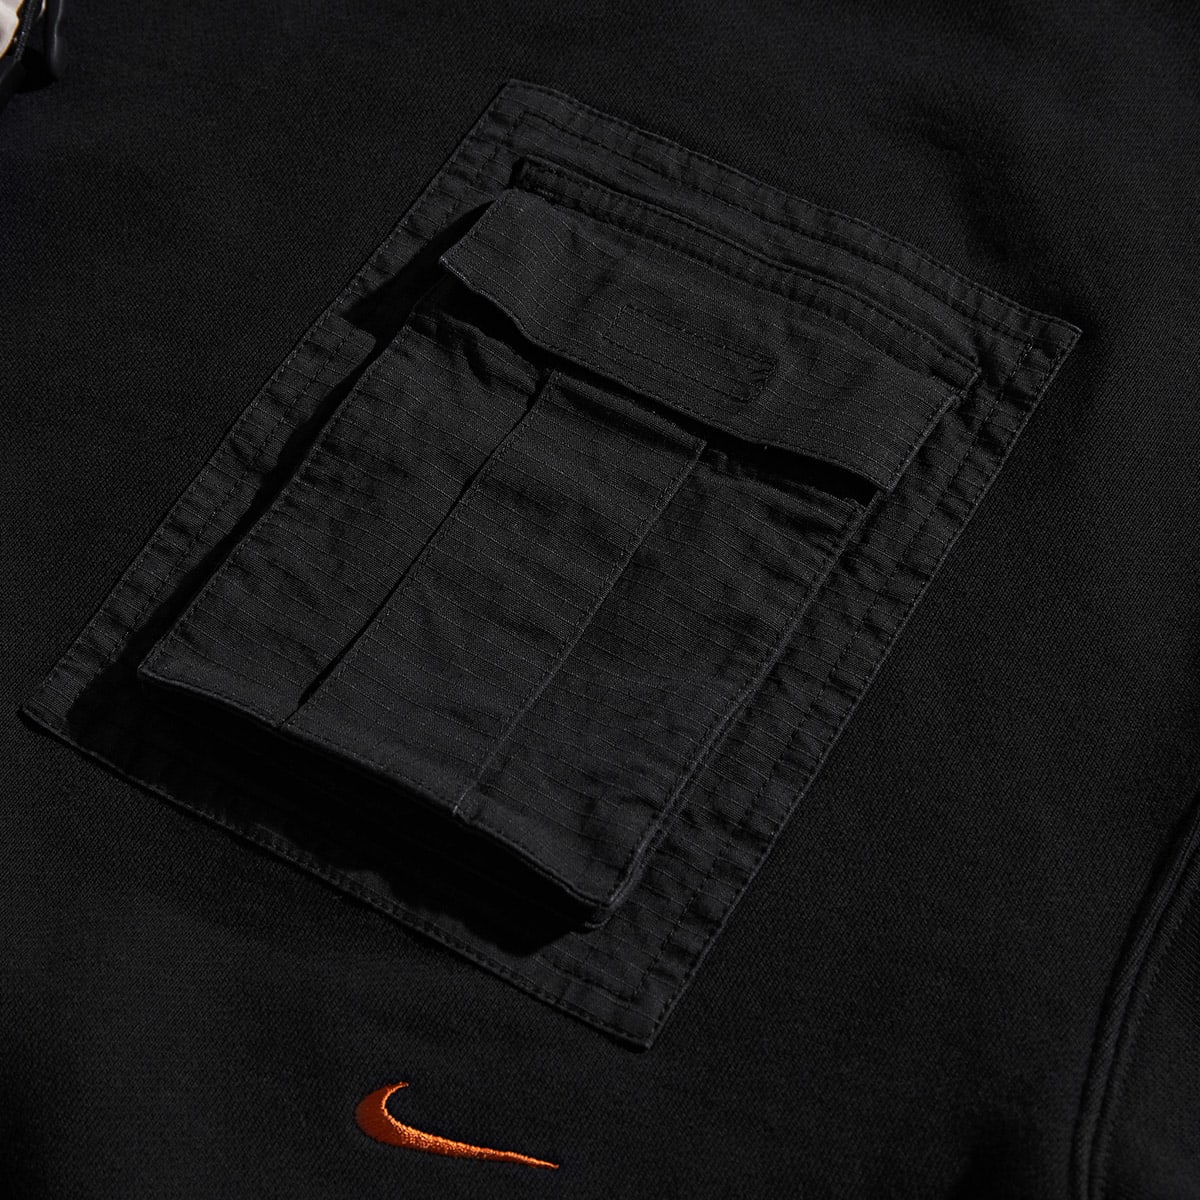 Nike x Cactus Jack Utility Hoody (Black) | END. Launches